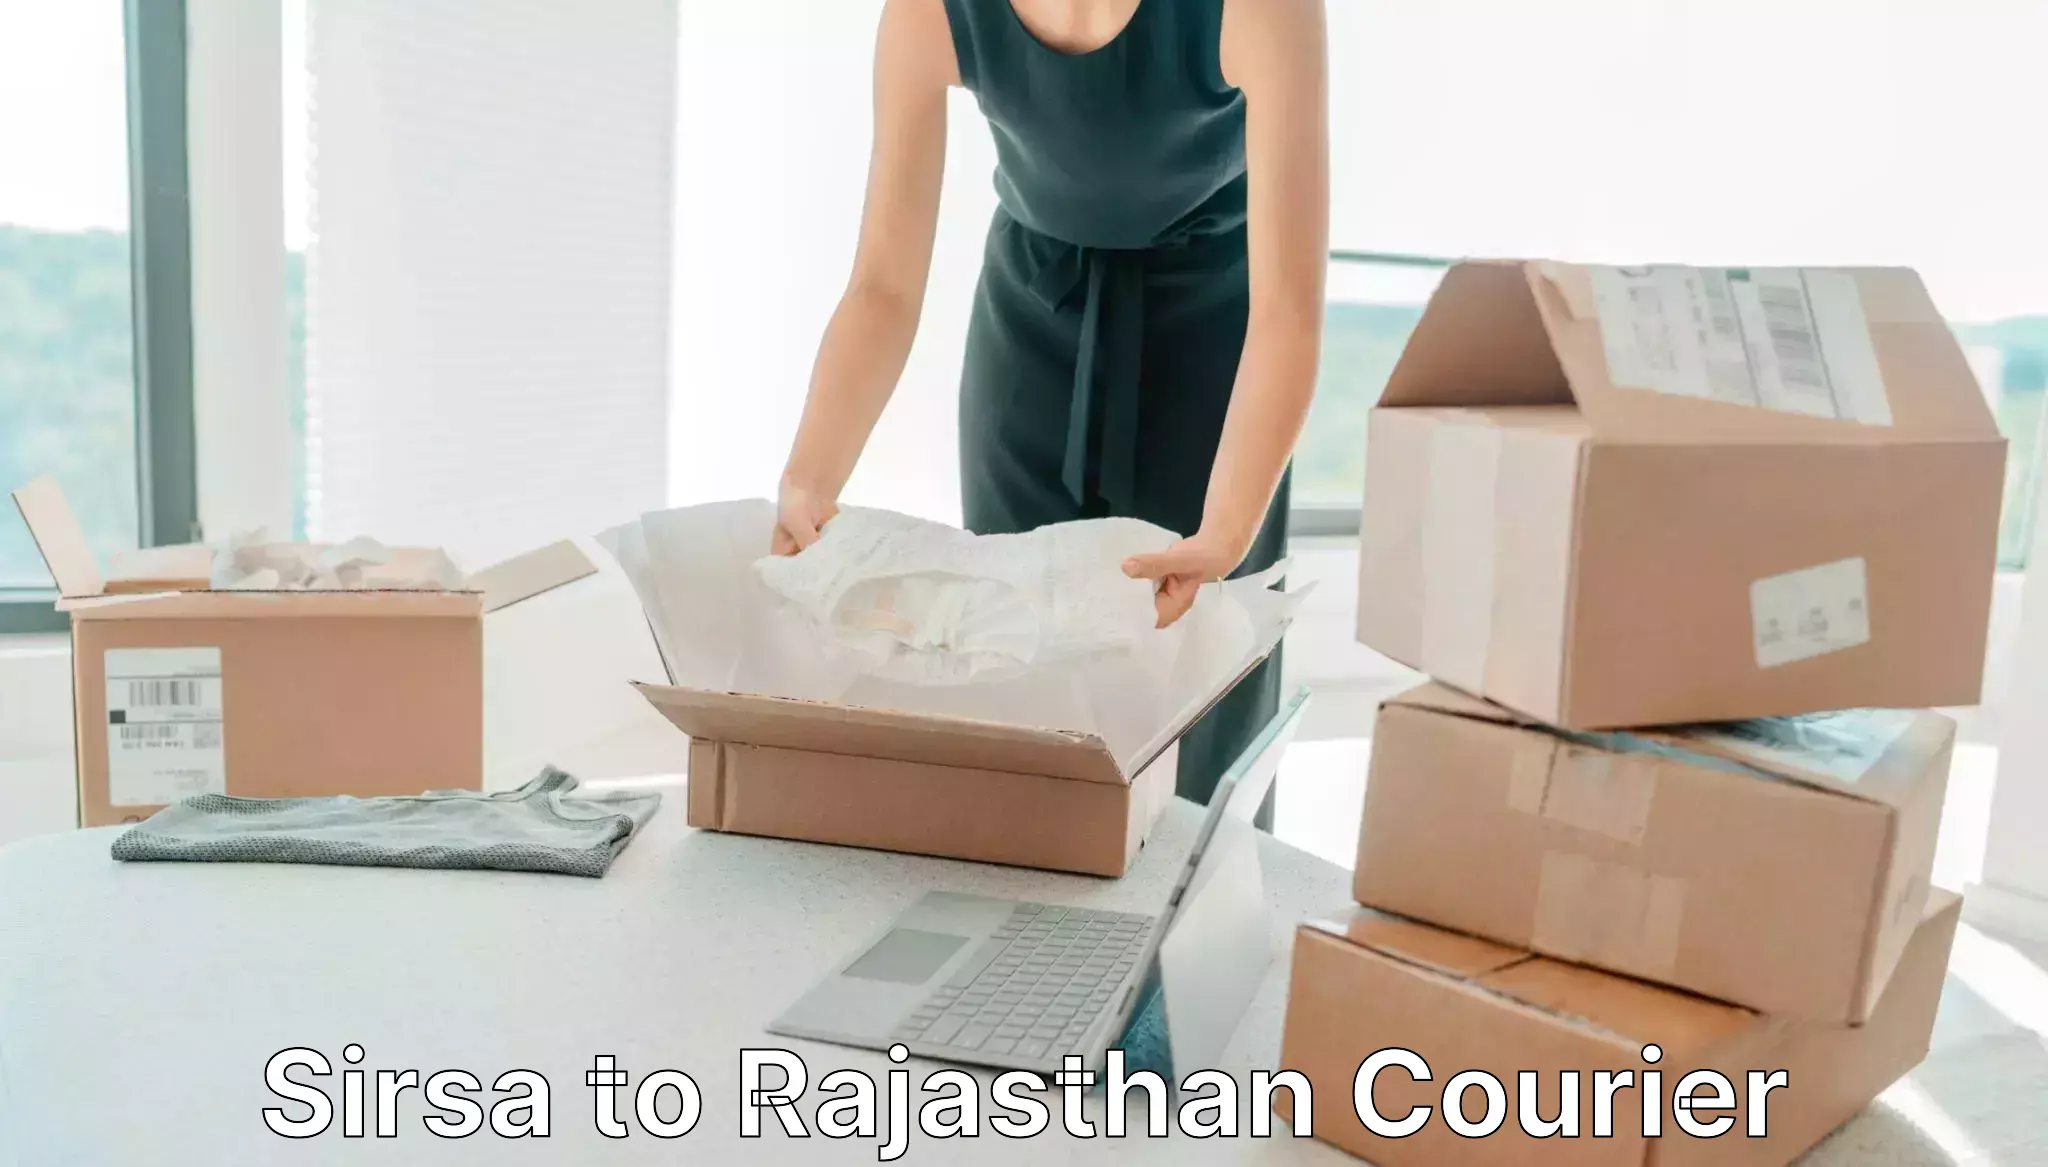 Courier tracking online Sirsa to Rajasthan